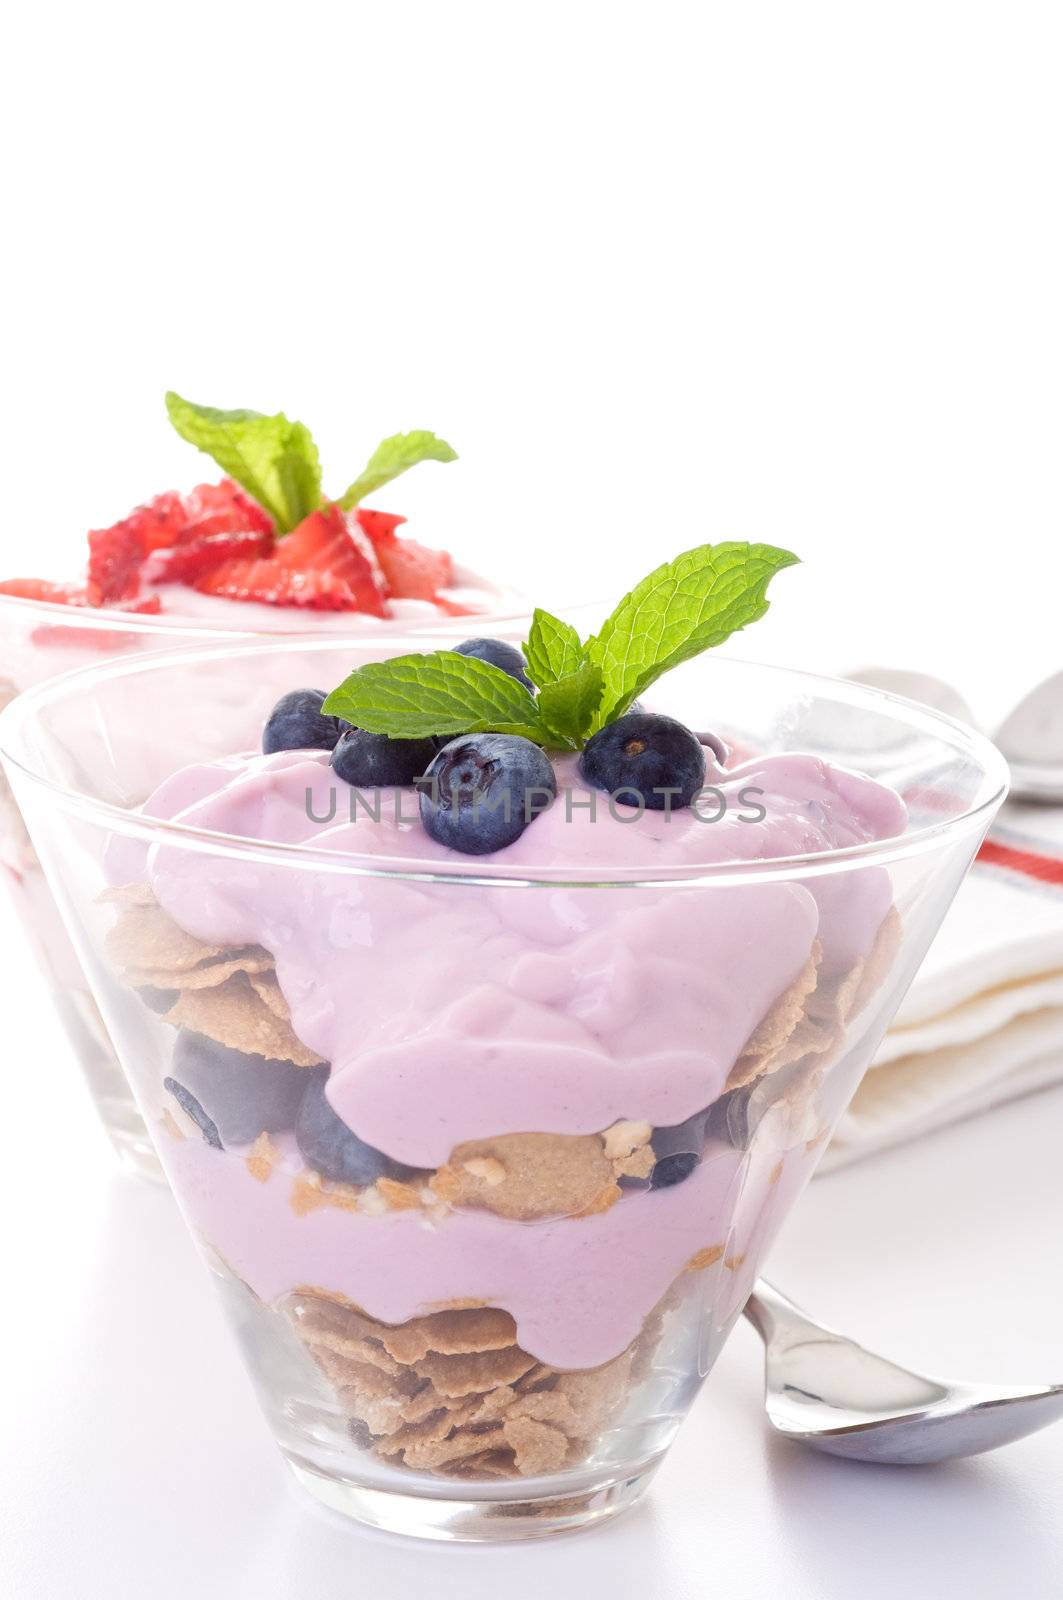 Delicious fruit and yogurt parfait in a glass.